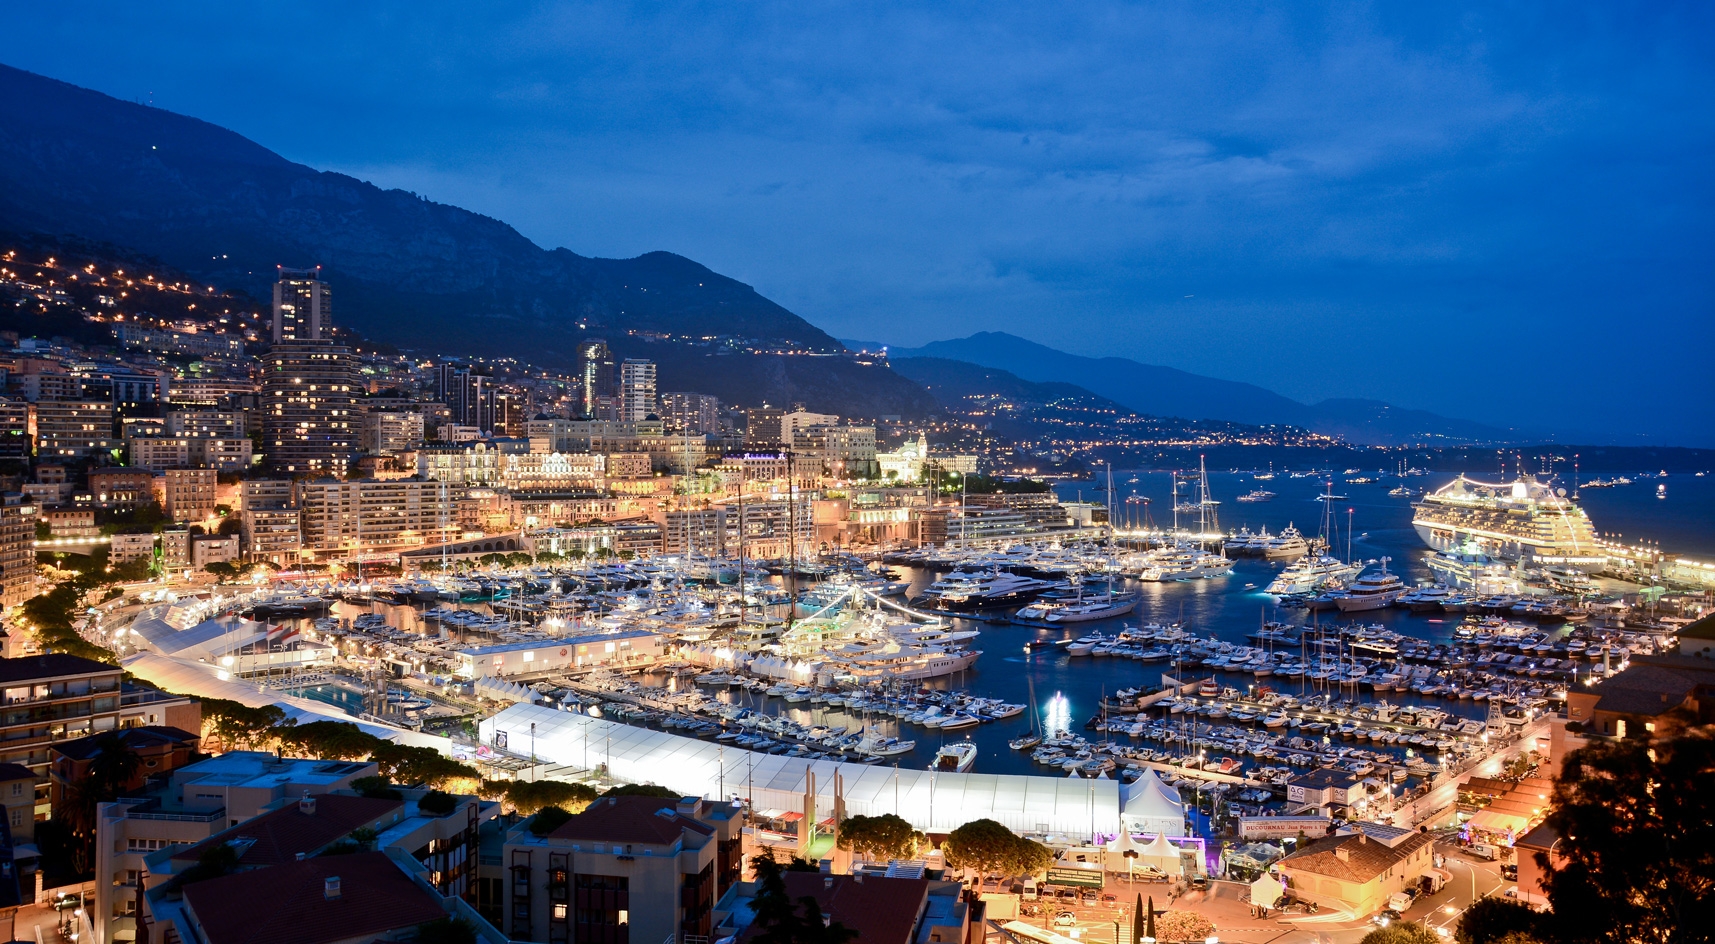 Monaco Yacht Show 2014, ideal for peeking and chartering.